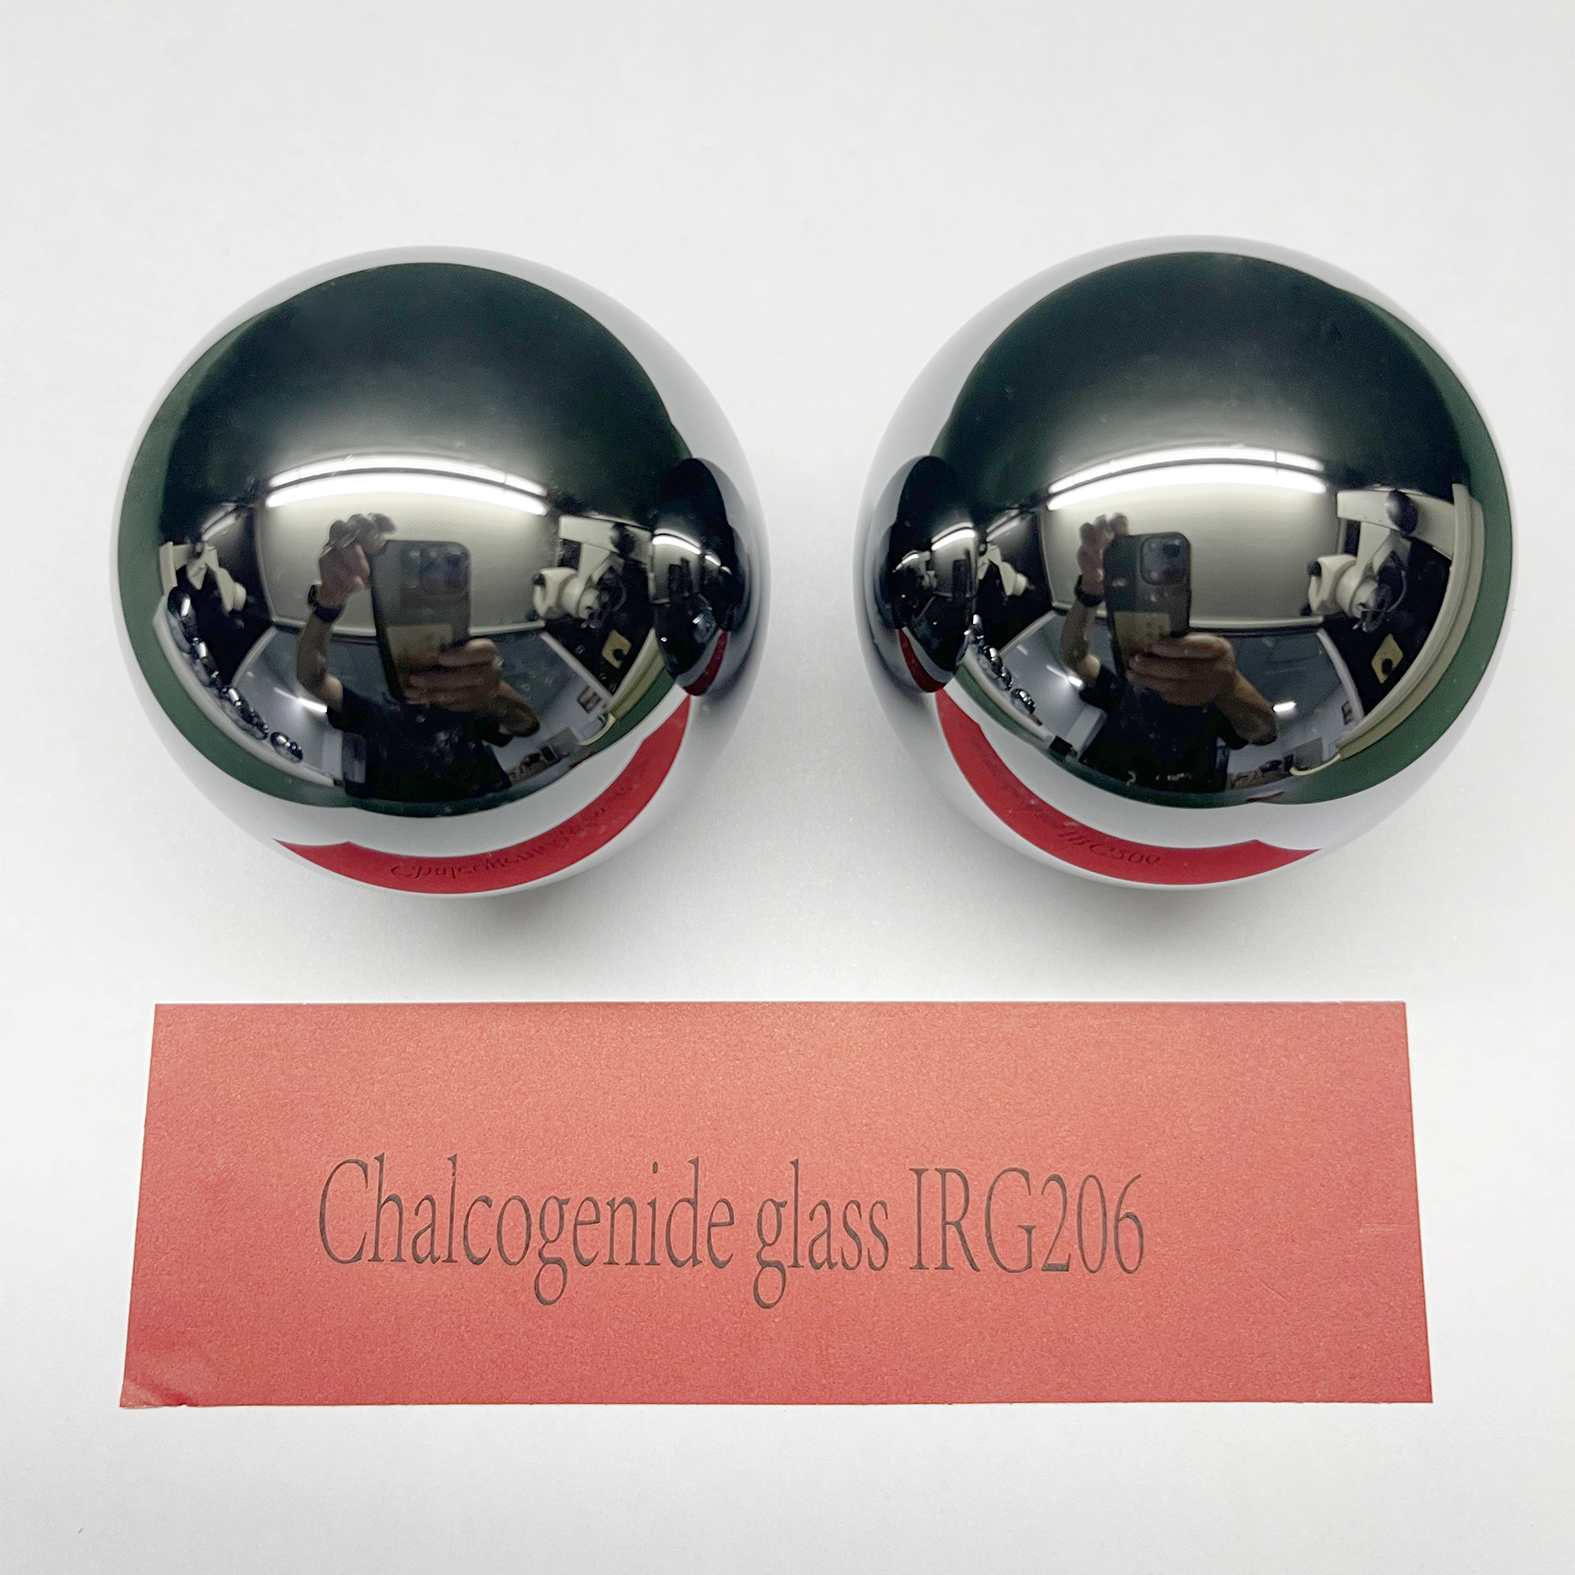 The Light of China ---- Manufacturing the biggest ball lens with infrared glass HWS6 Chalcogenide